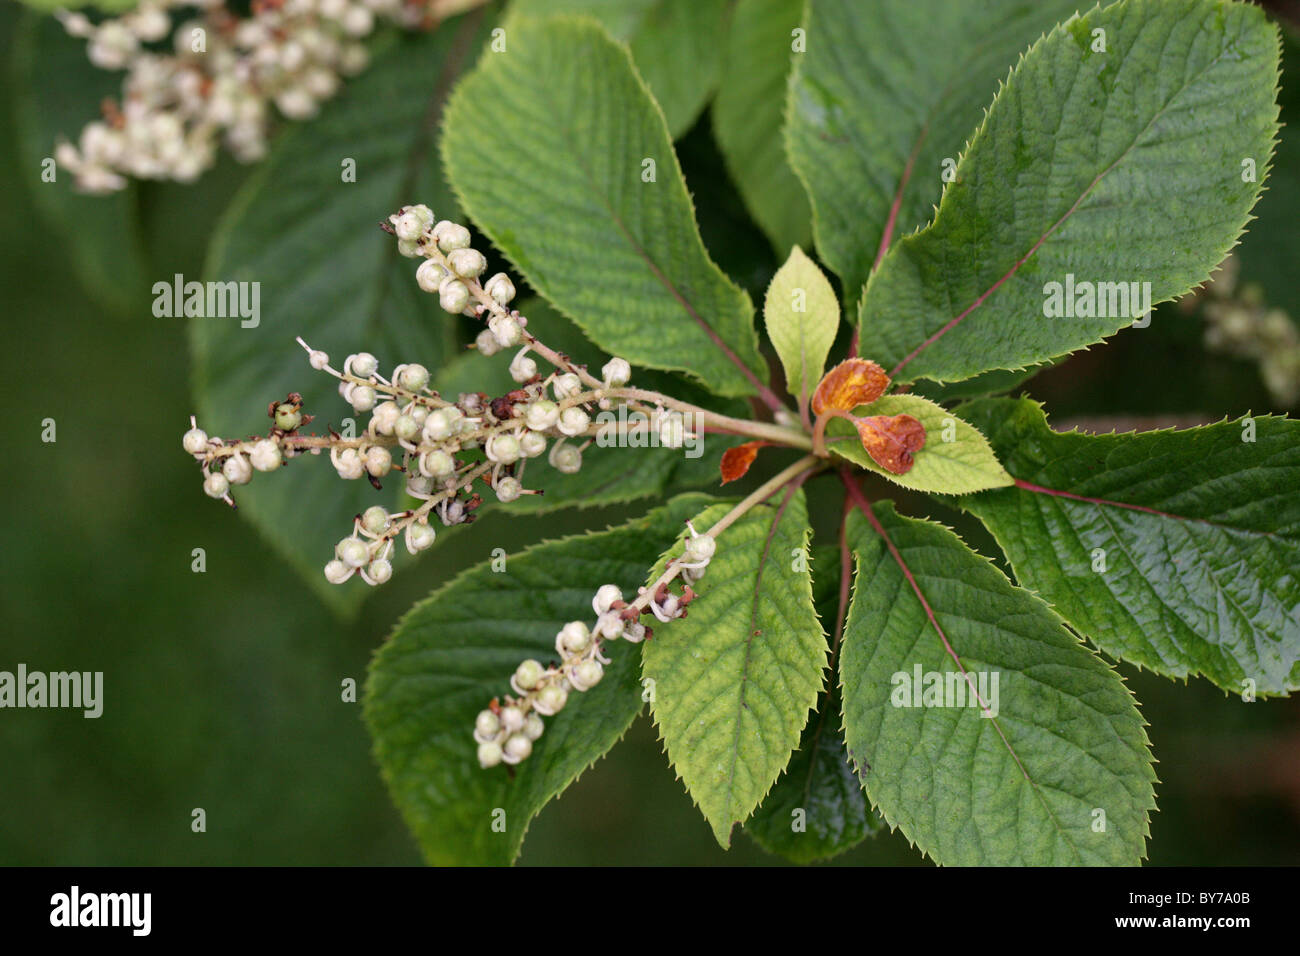 Japanese Sweet Shrub, Clethra barbinervis, Clethraceae. Japan, Korea and China, Asia Stock Photo